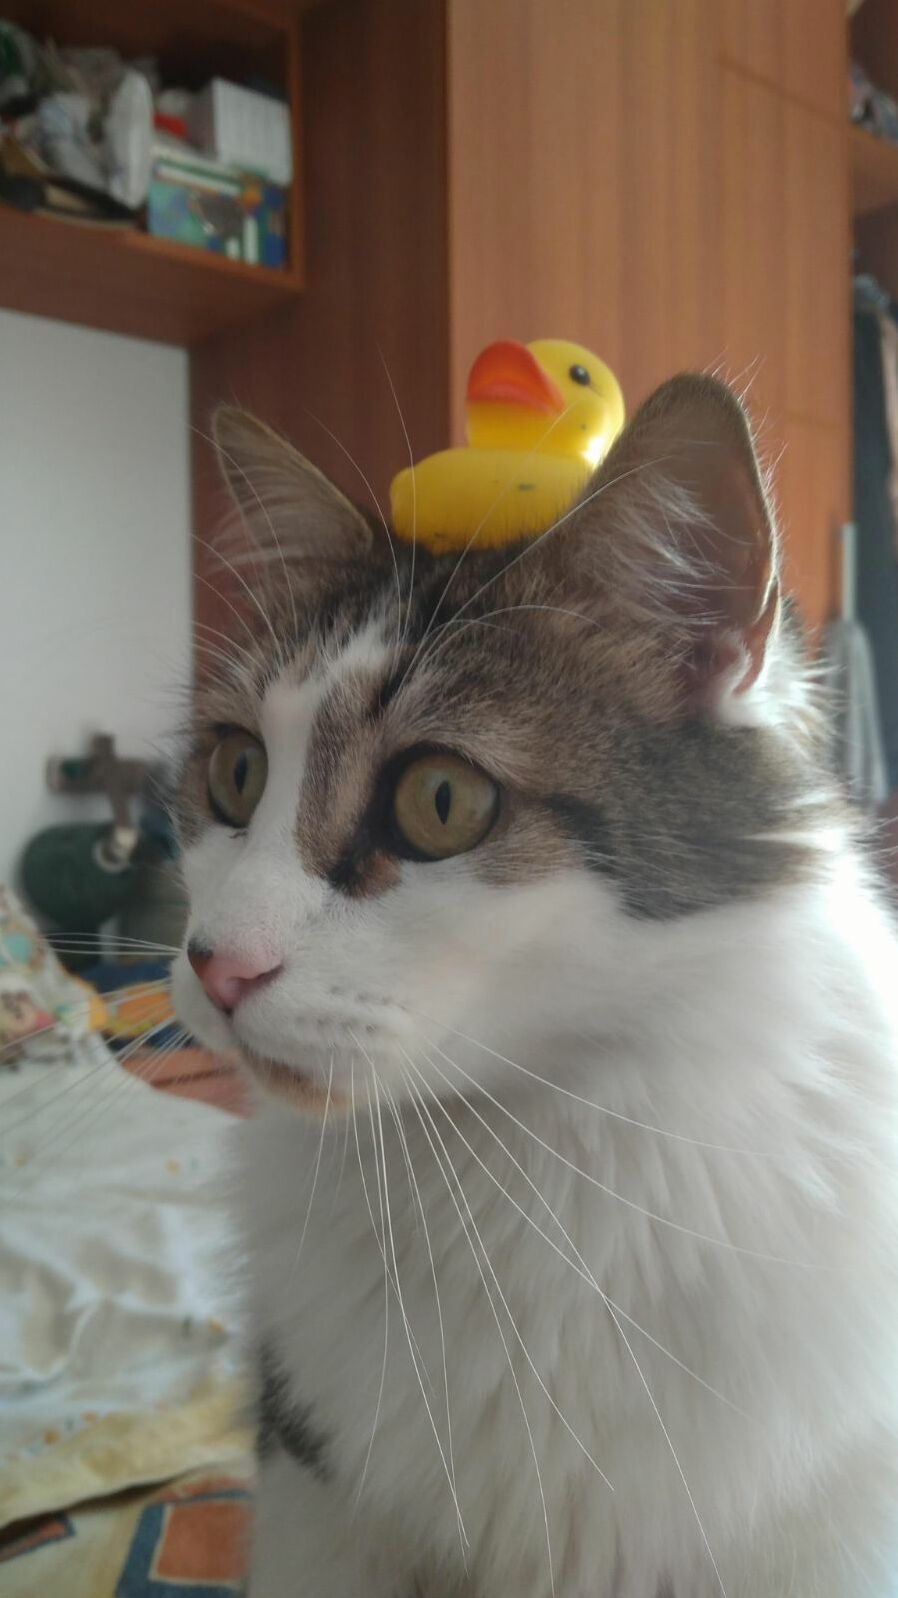 Duck controlling my cat